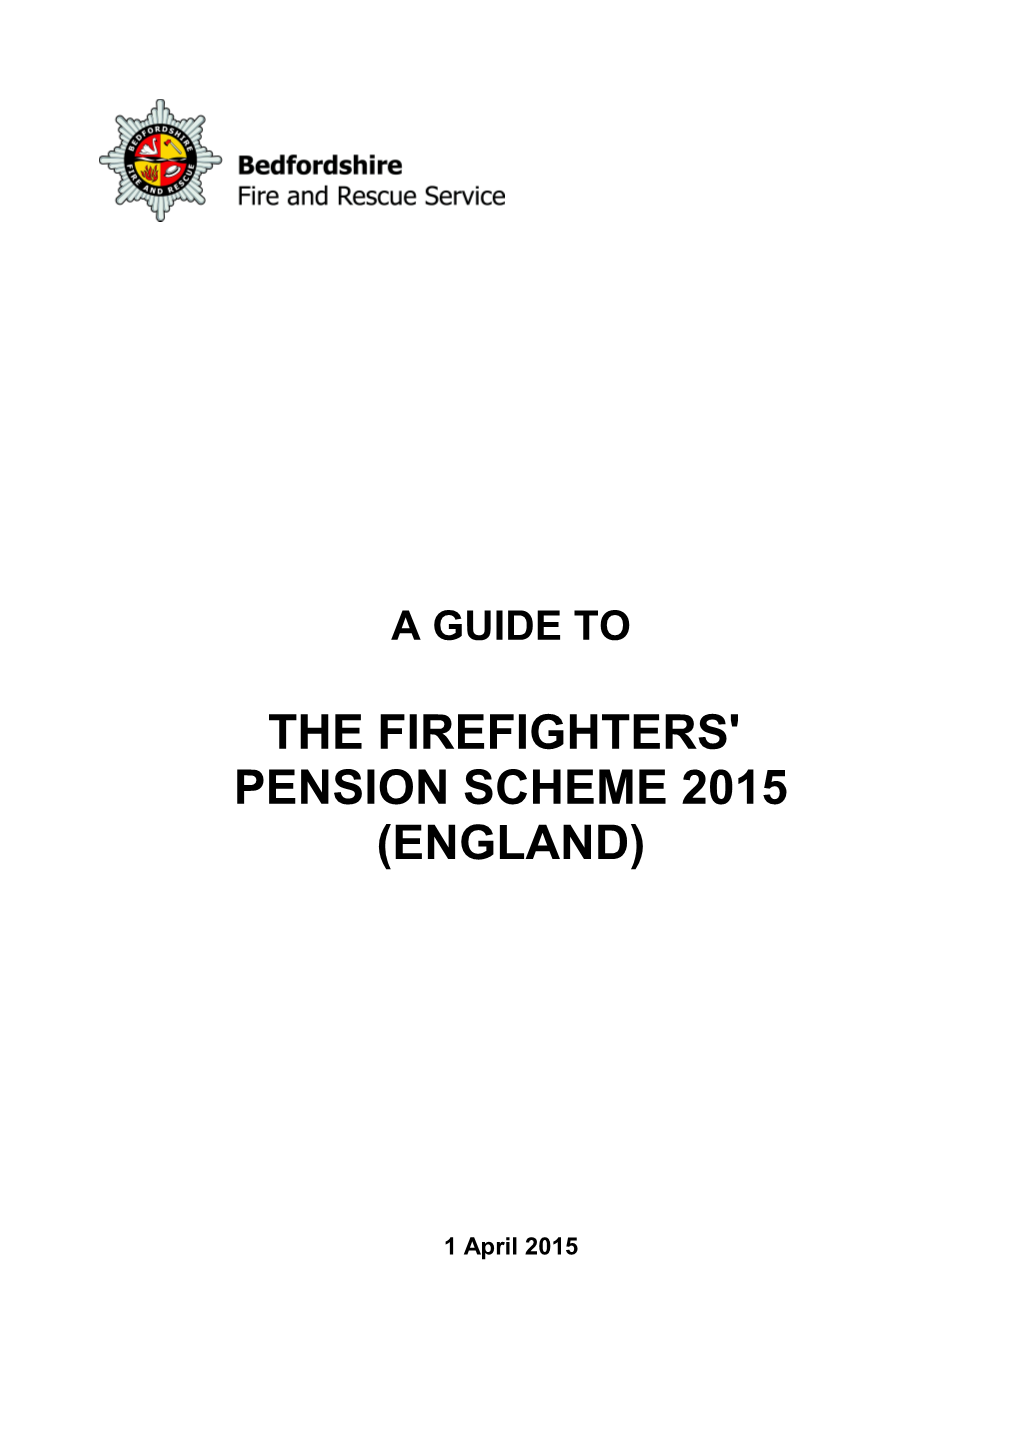 The Firefighters' Pension Scheme 2006